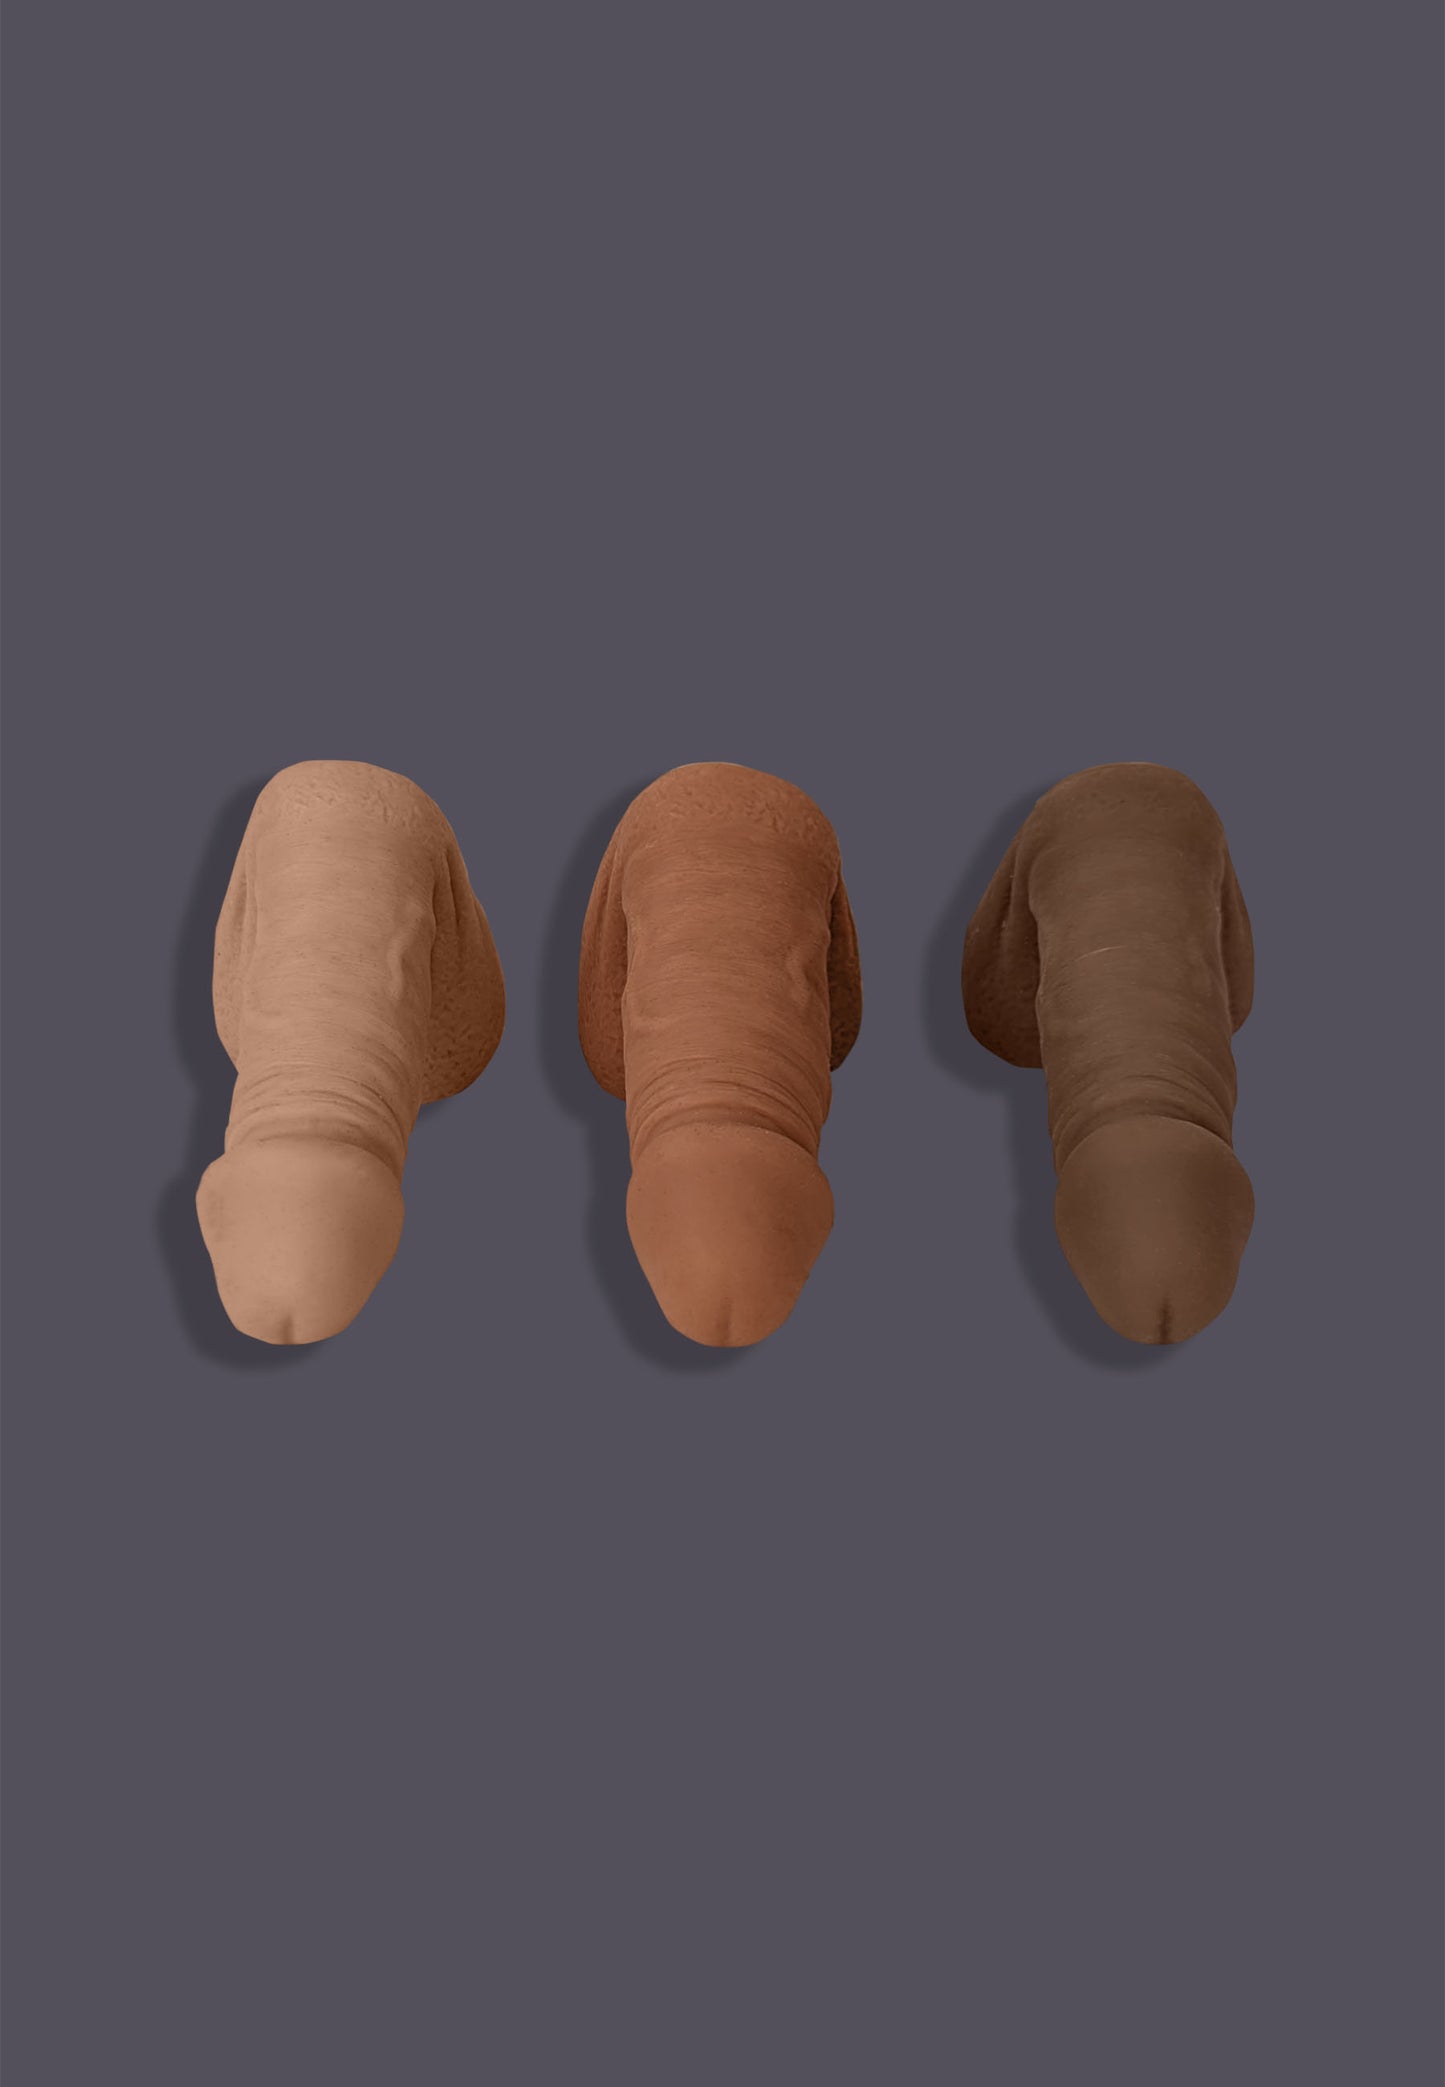 Penis Packer in three colors, vanilla caramel and chocolate